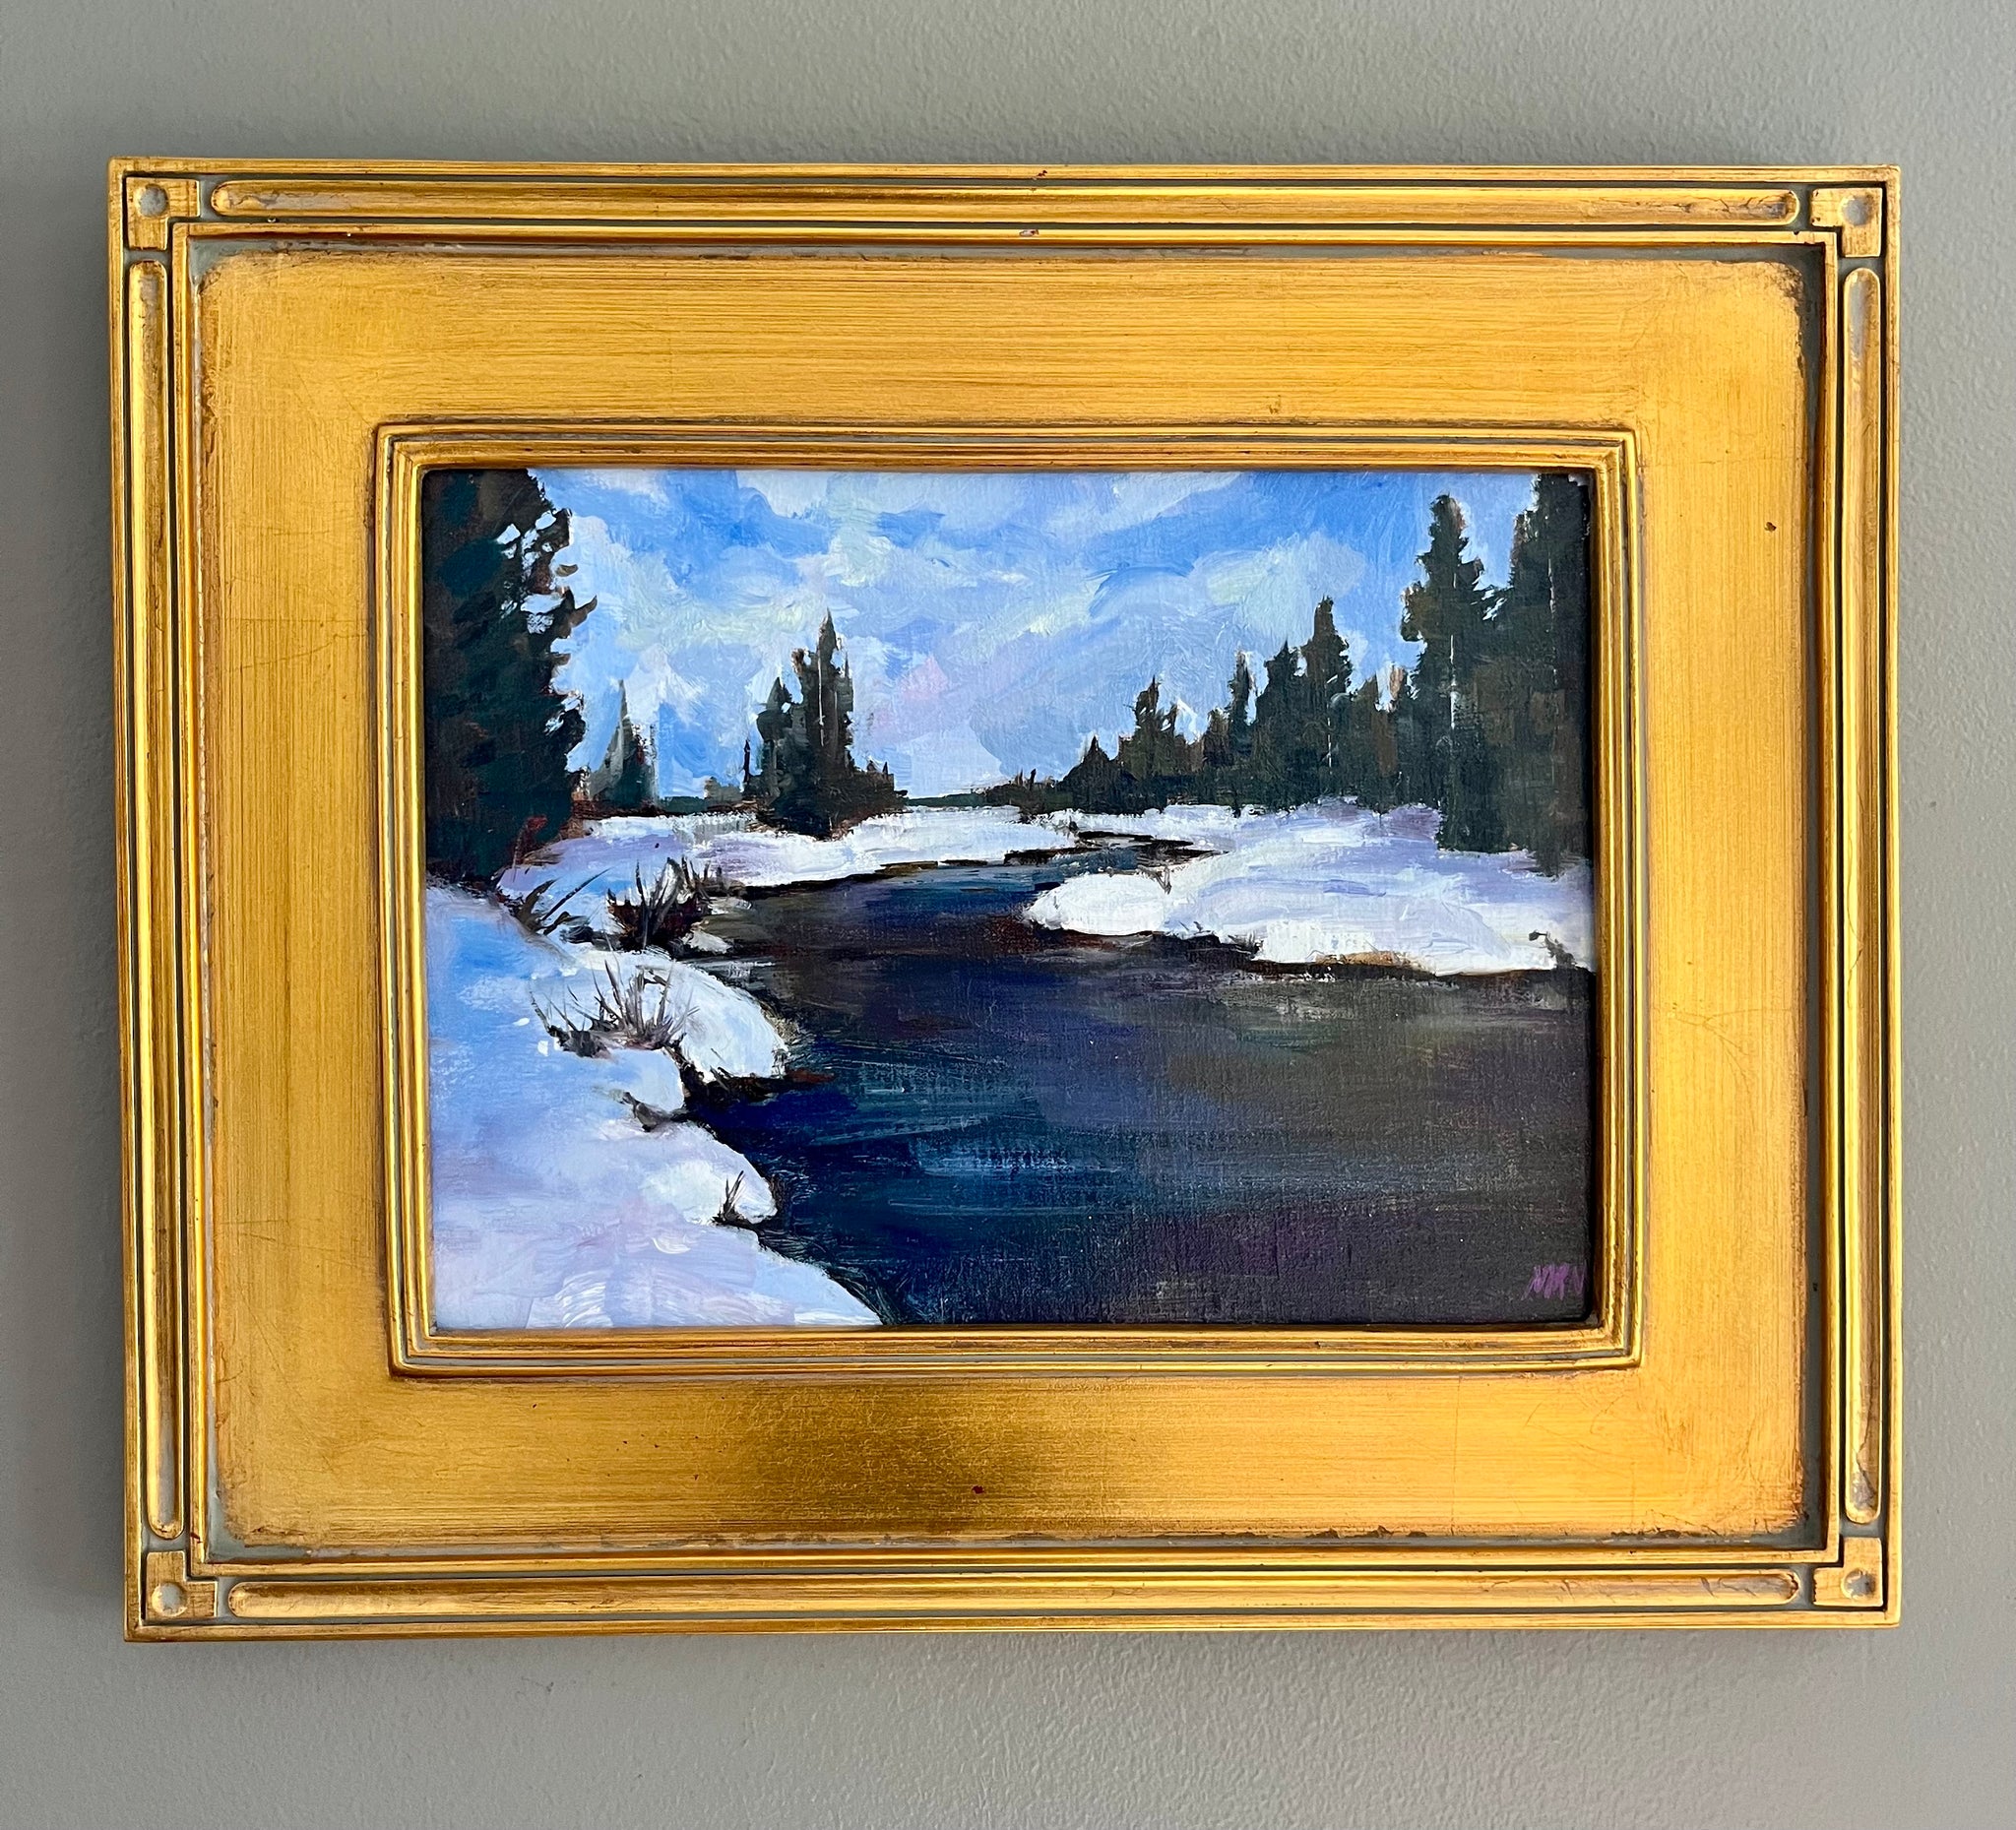 "Winter on the Yellowstone River"